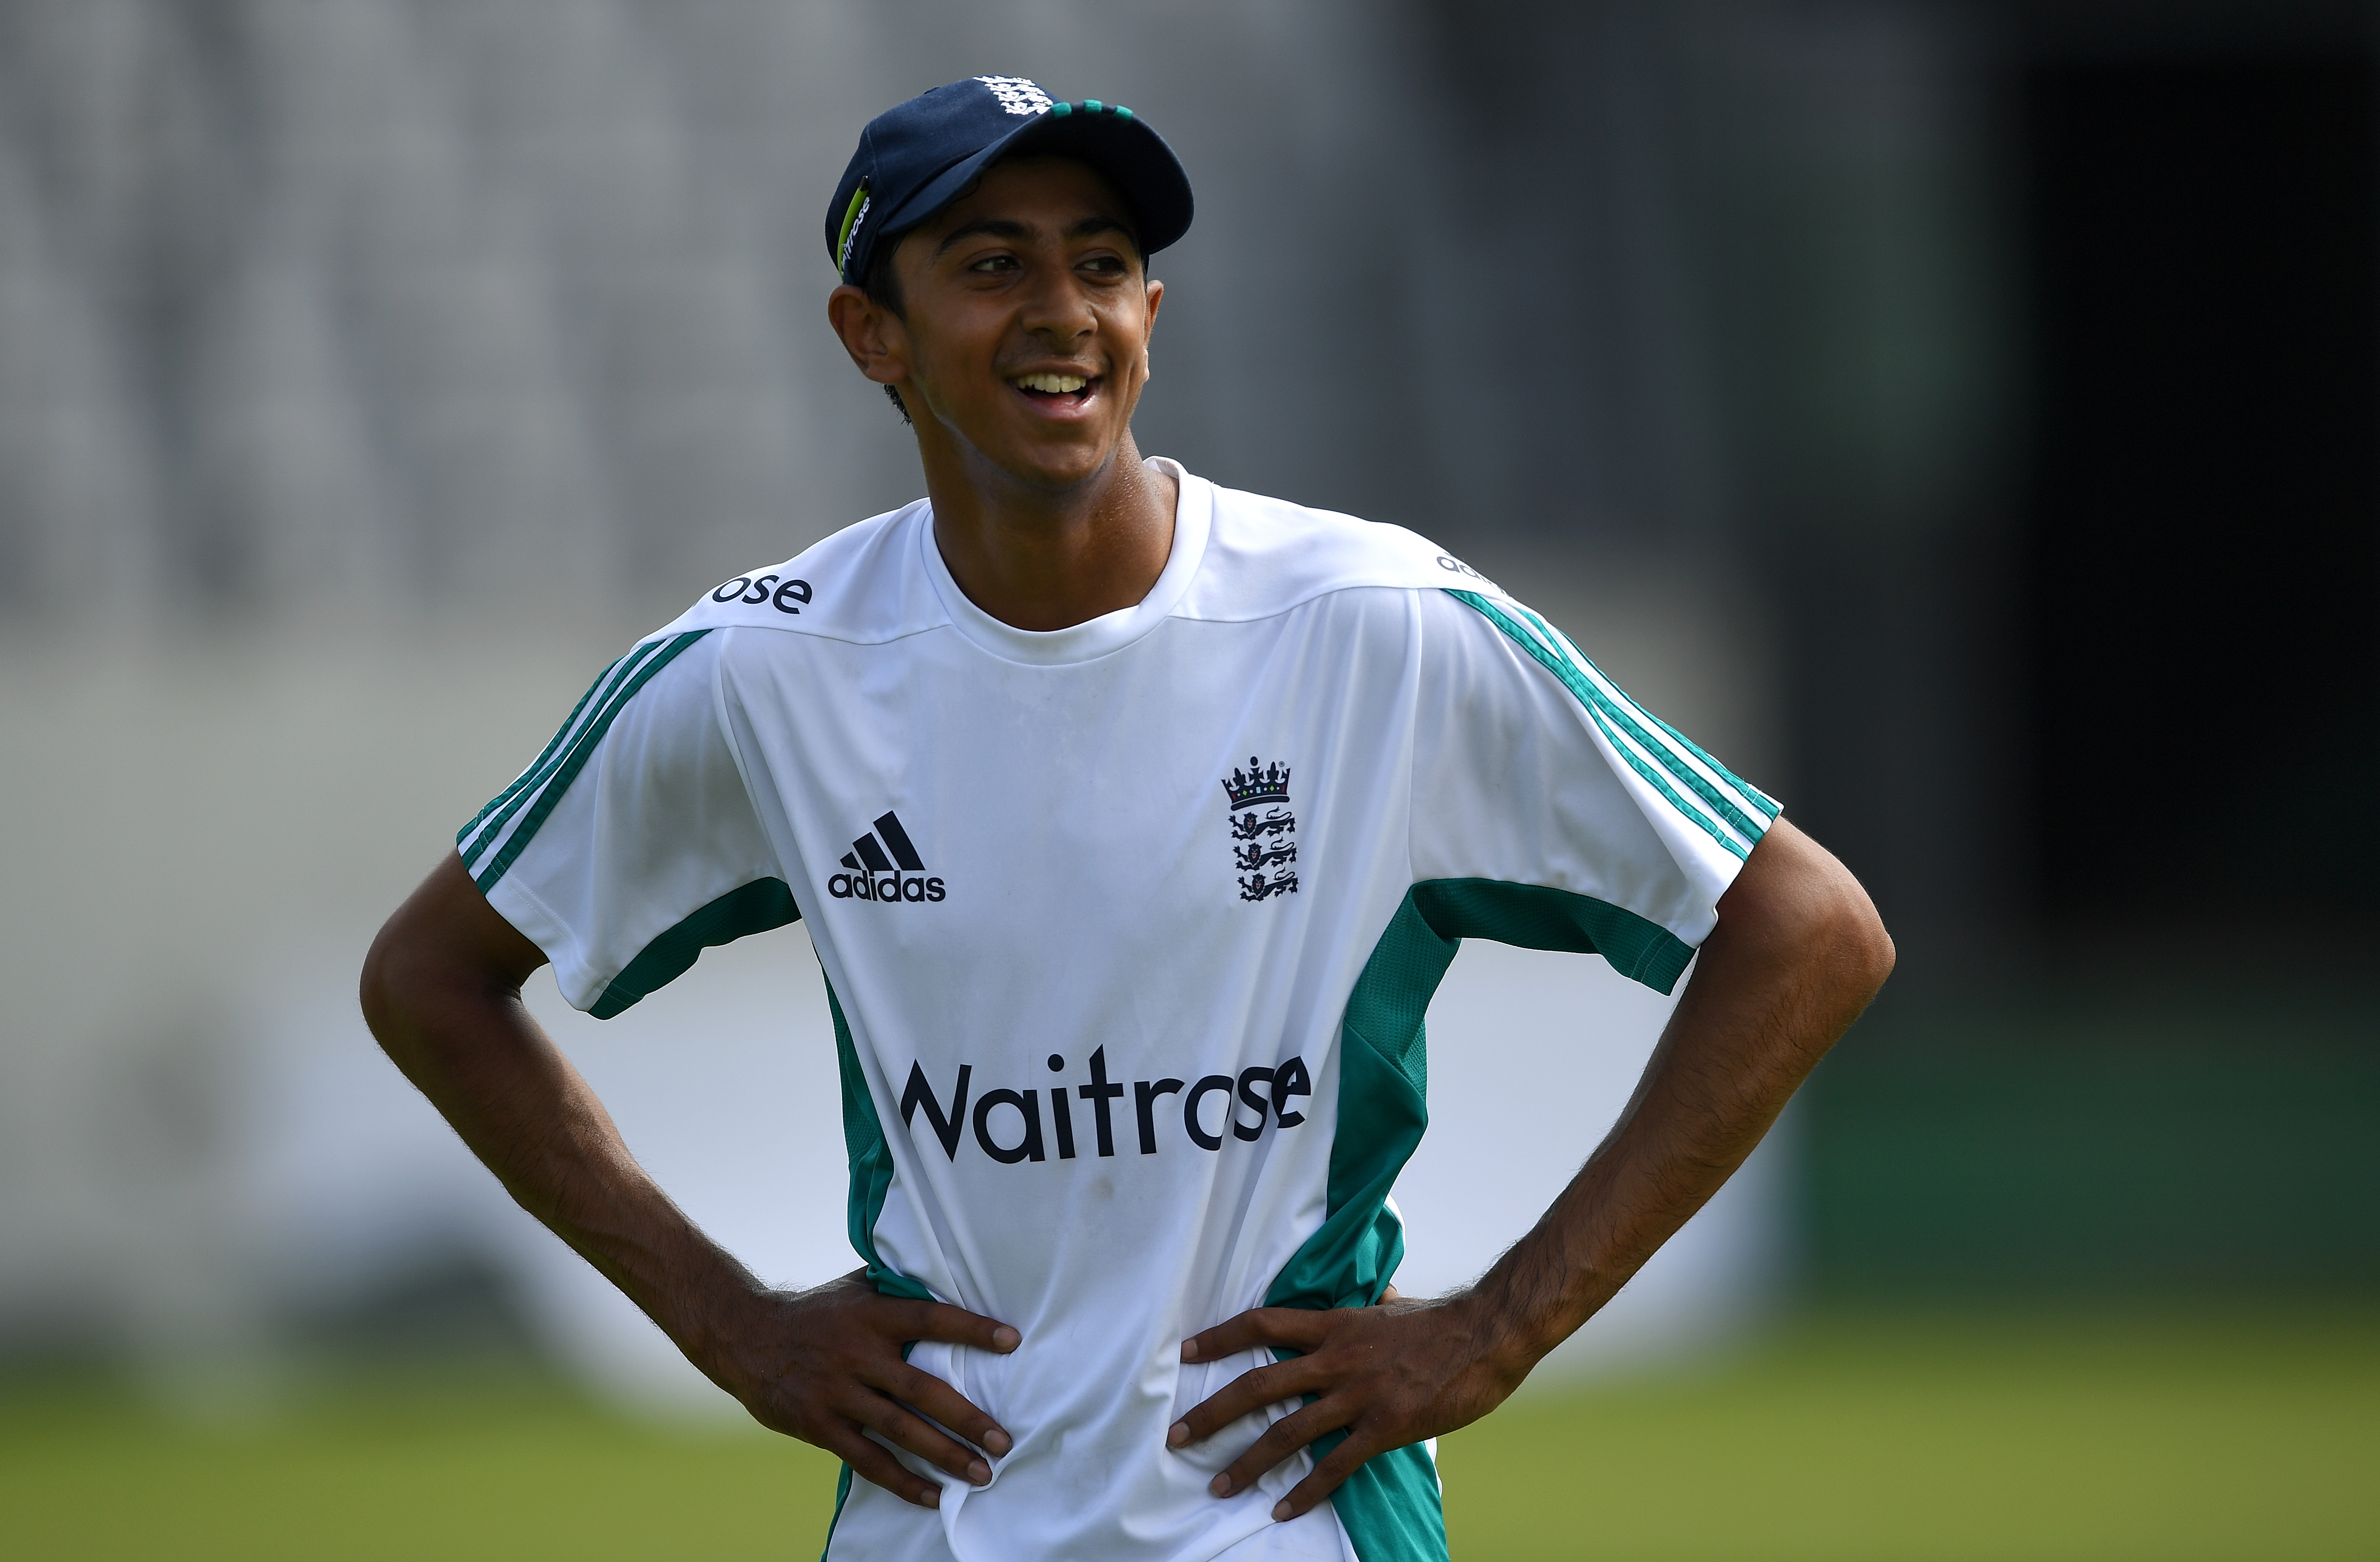 Nottinghamshire rope Haseeb Hameed on a two-year contract